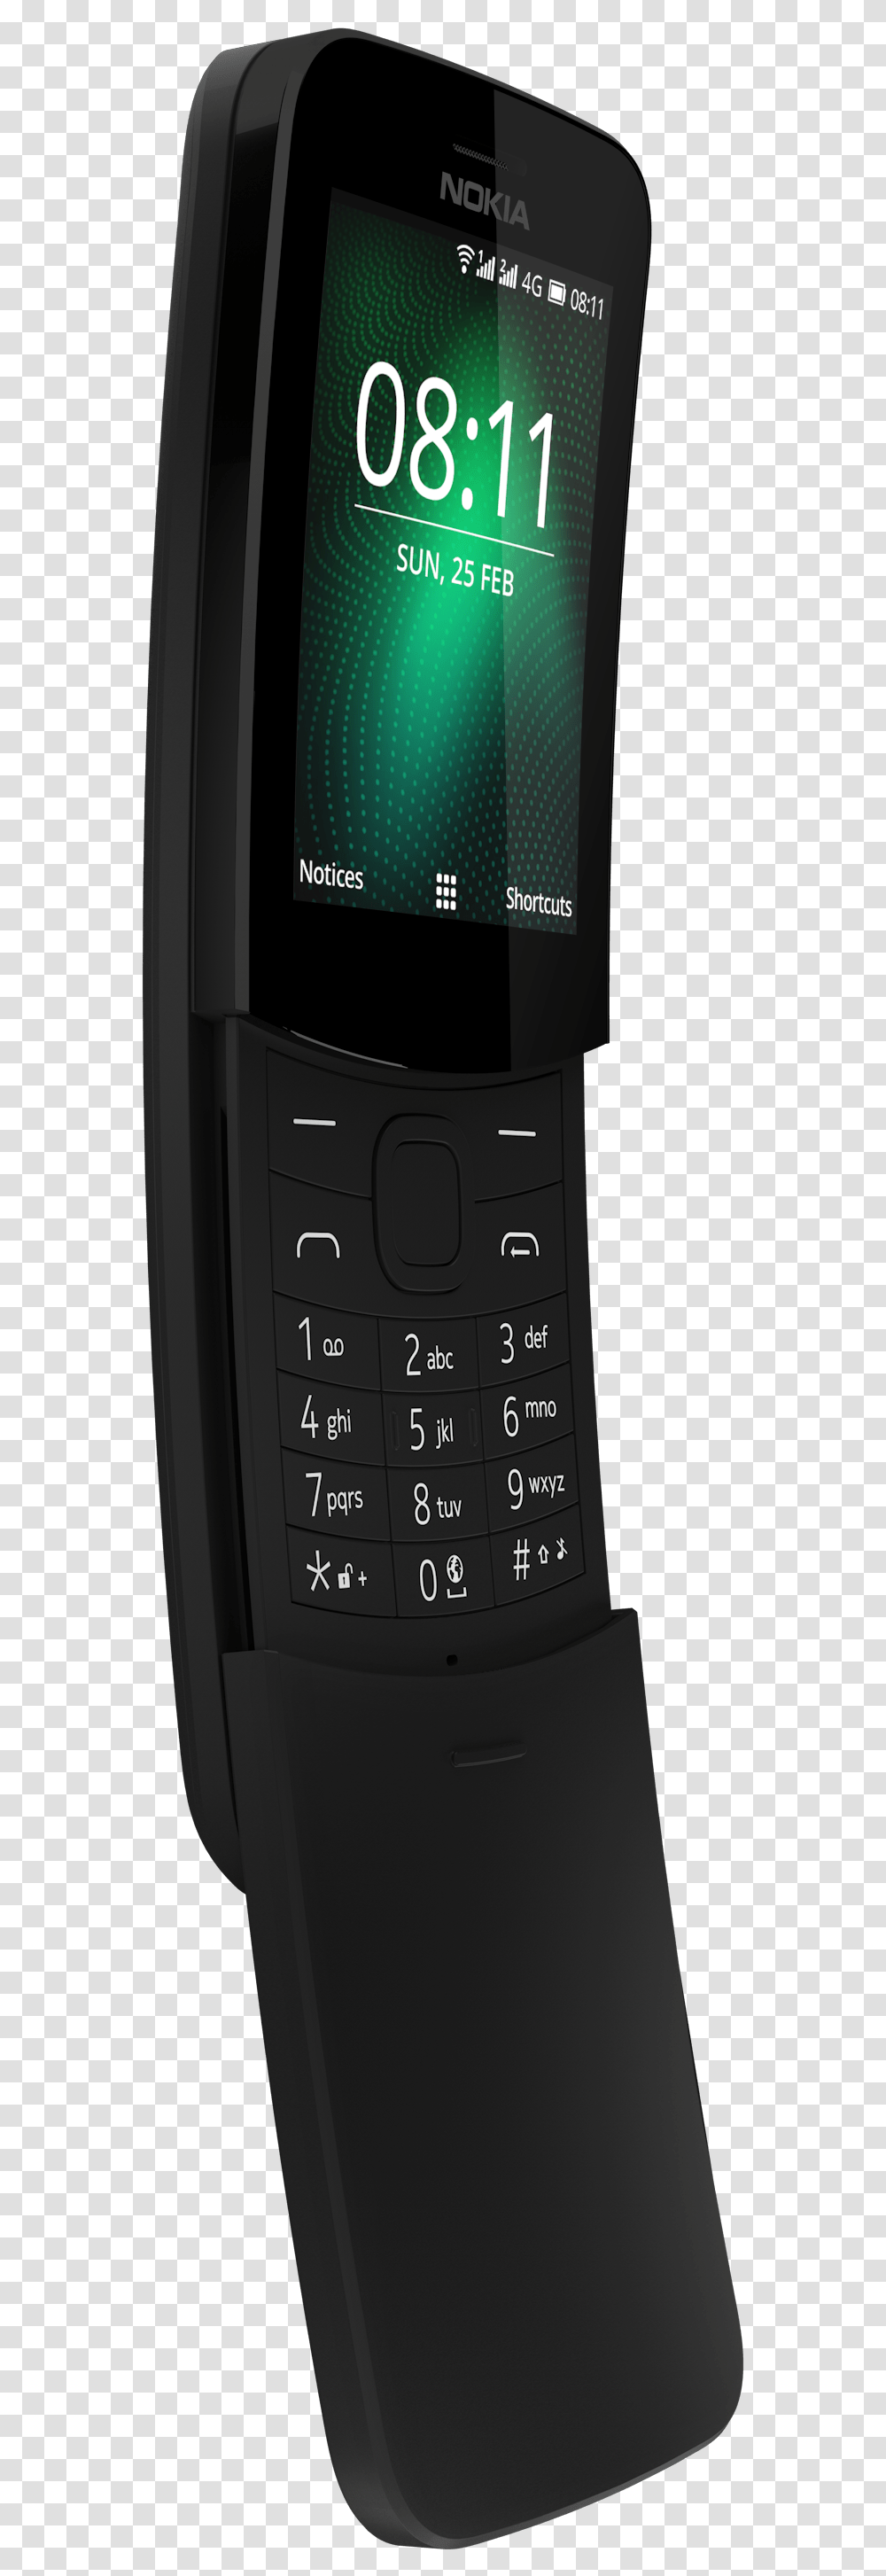 Nokia 8110 G Price In Pakistan, Mobile Phone, Electronics, Cell Phone Transparent Png